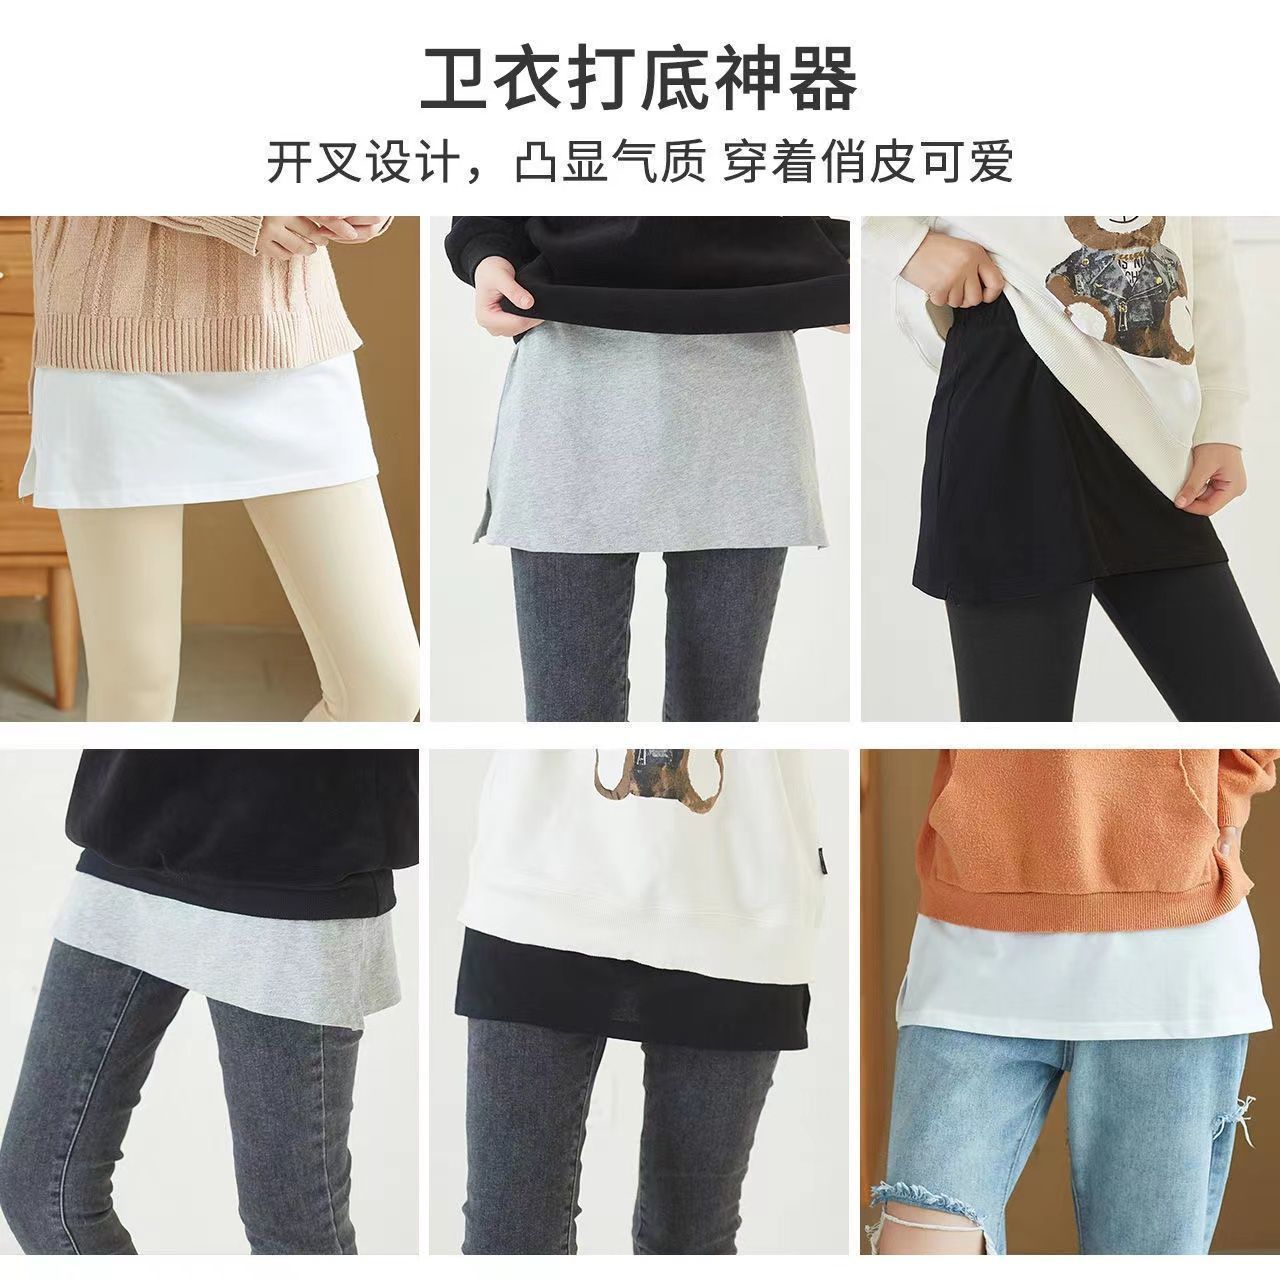 Small fart curtain women's sweater bottoming artifact hem layered wear to cover the buttocks spring and autumn winter all-match cotton skirt